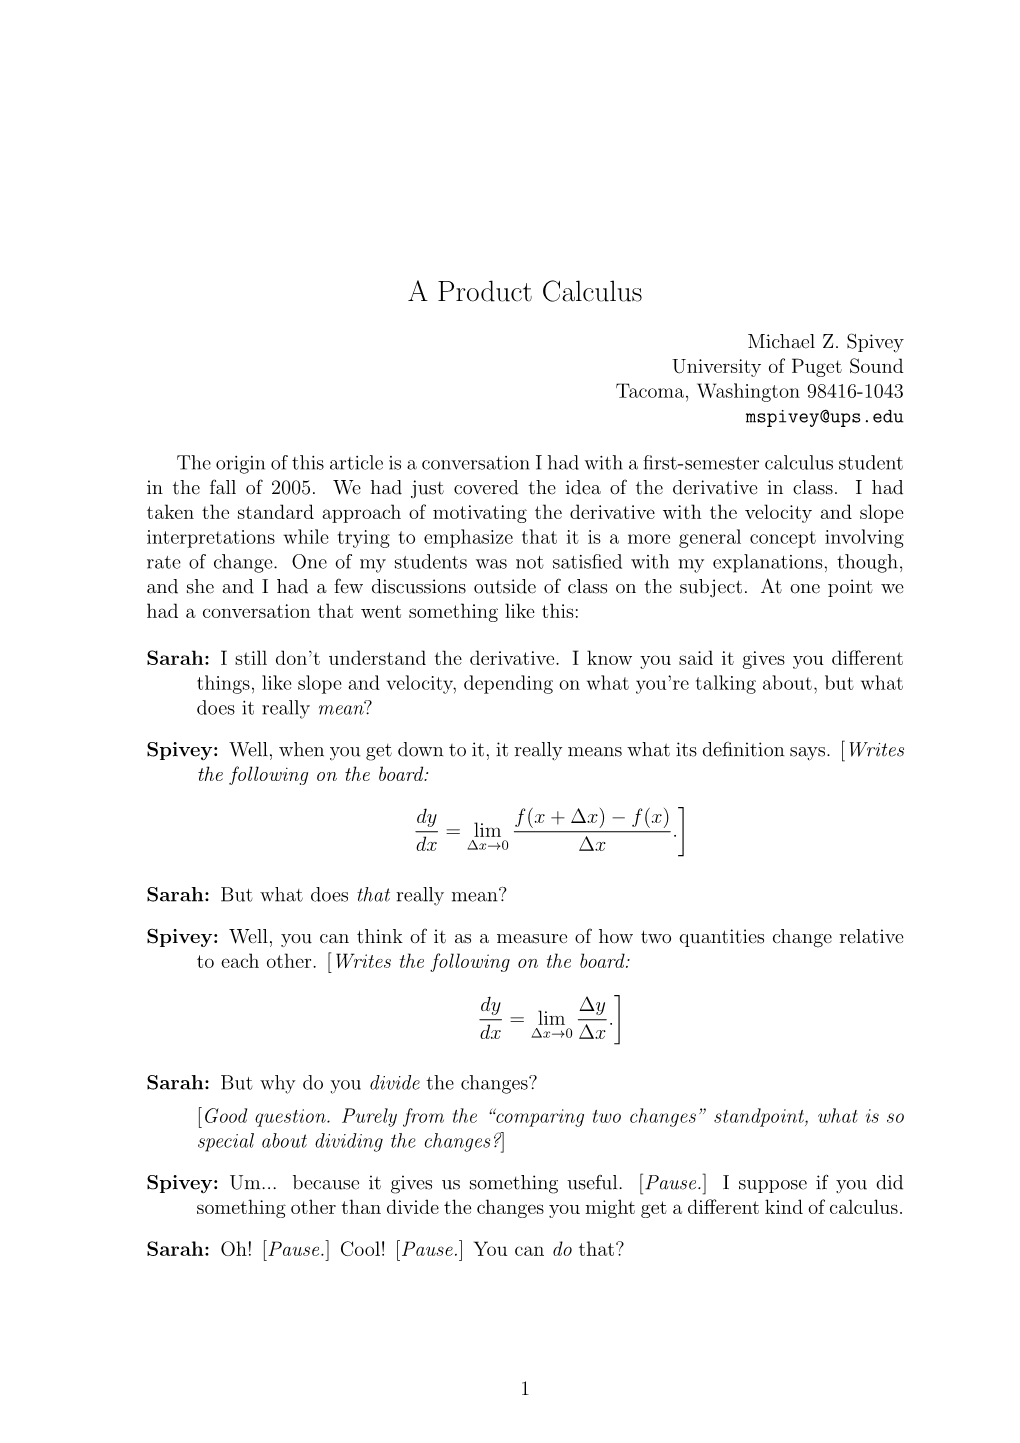 A Product Calculus